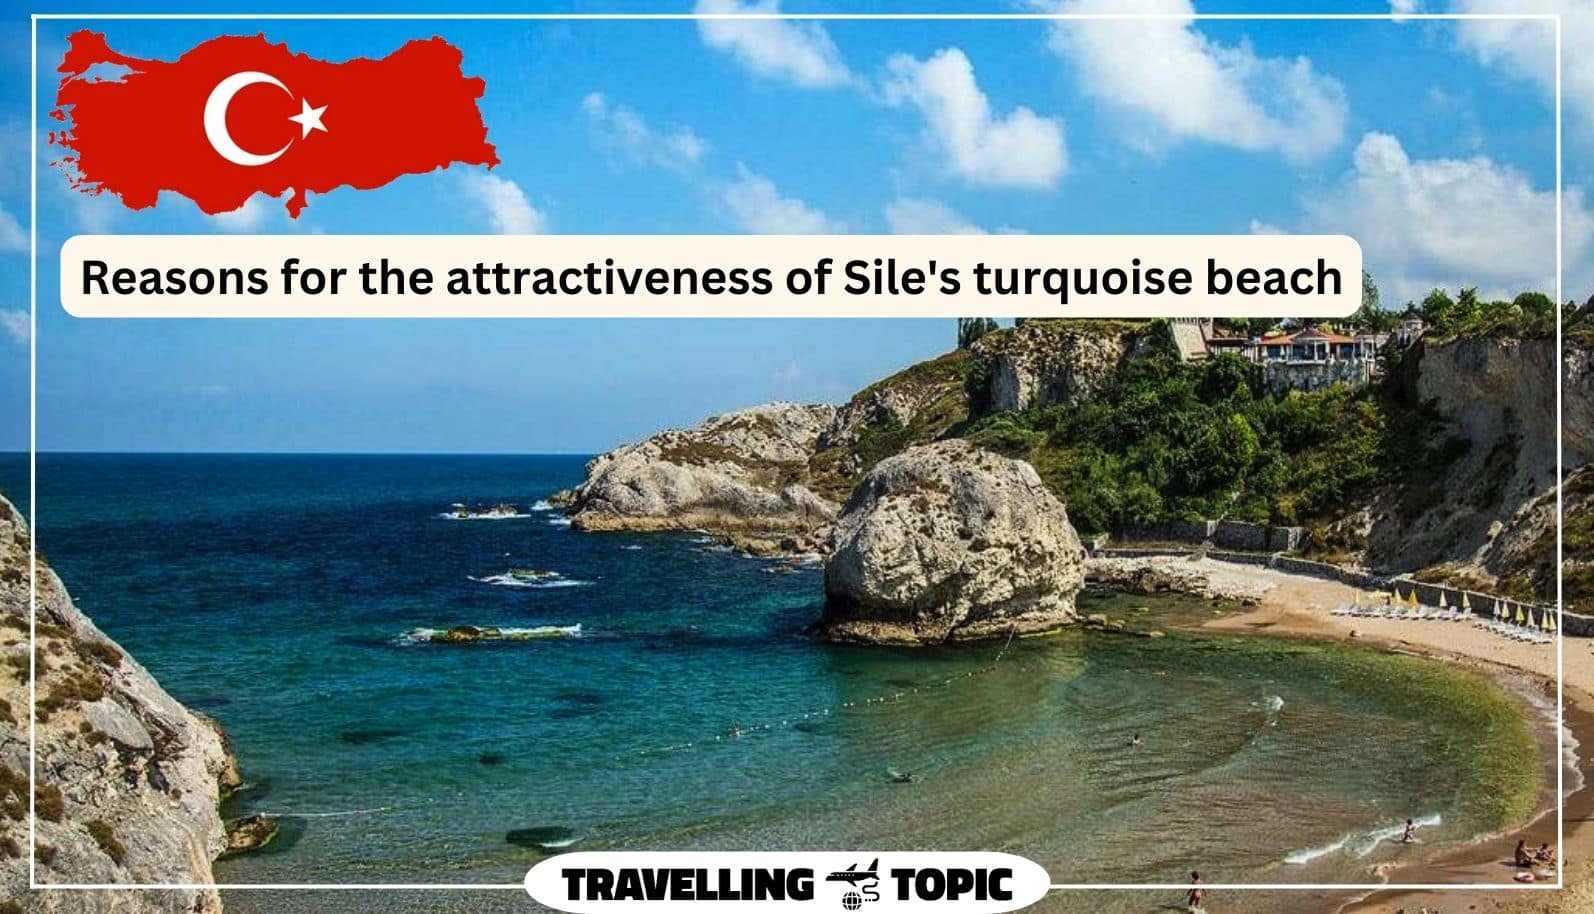 Reasons for the attractiveness of Sile's turquoise beach